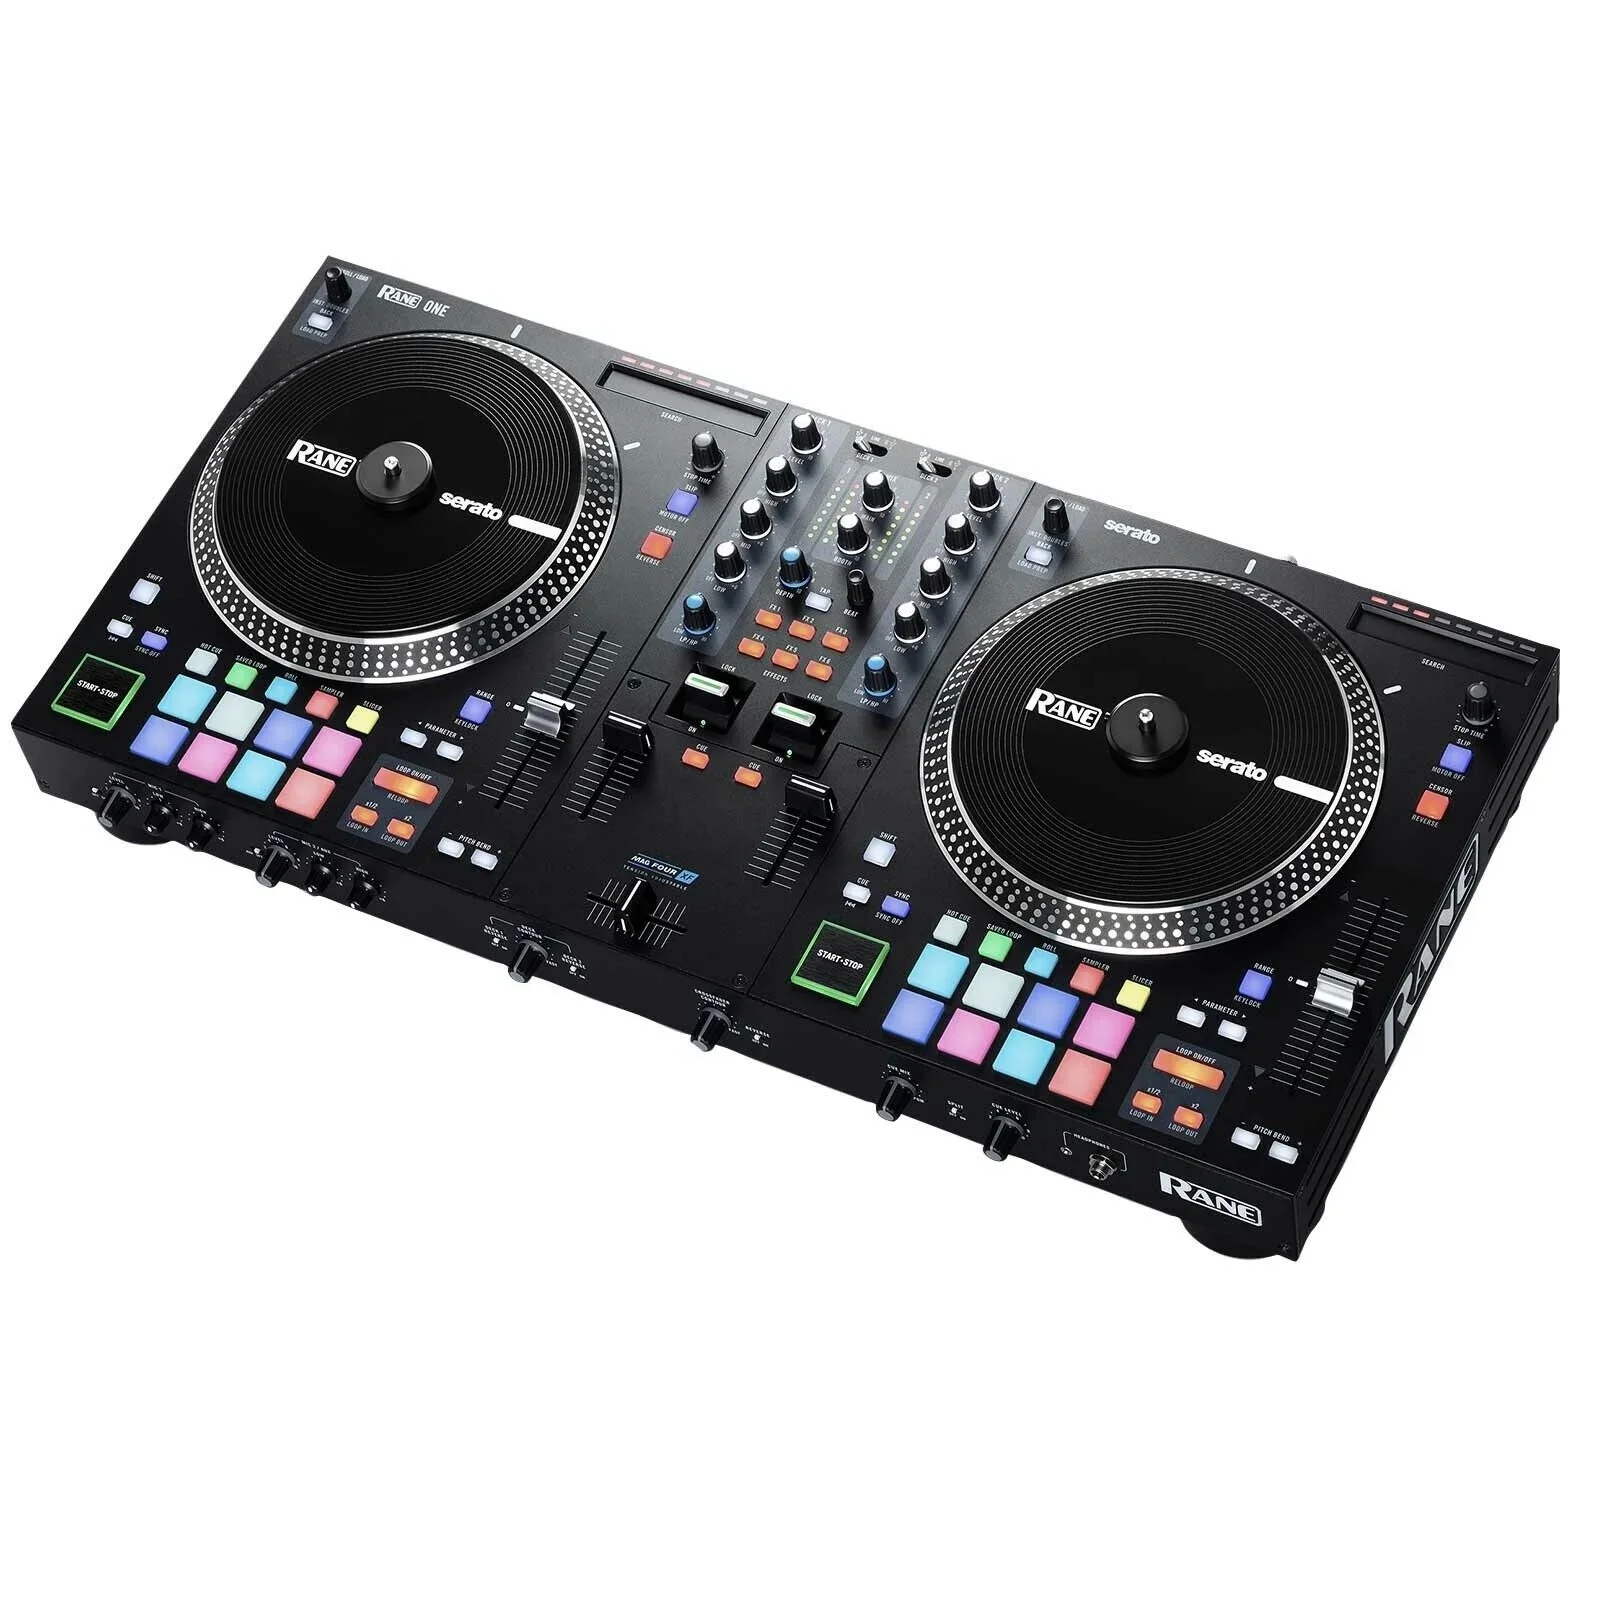 

SUMMER SALES DISCOUNT ON Buy With Confidence New Rane ONE 2 Channel Pro 7" Motorized Turntable Style Decks DJ Controller w Case